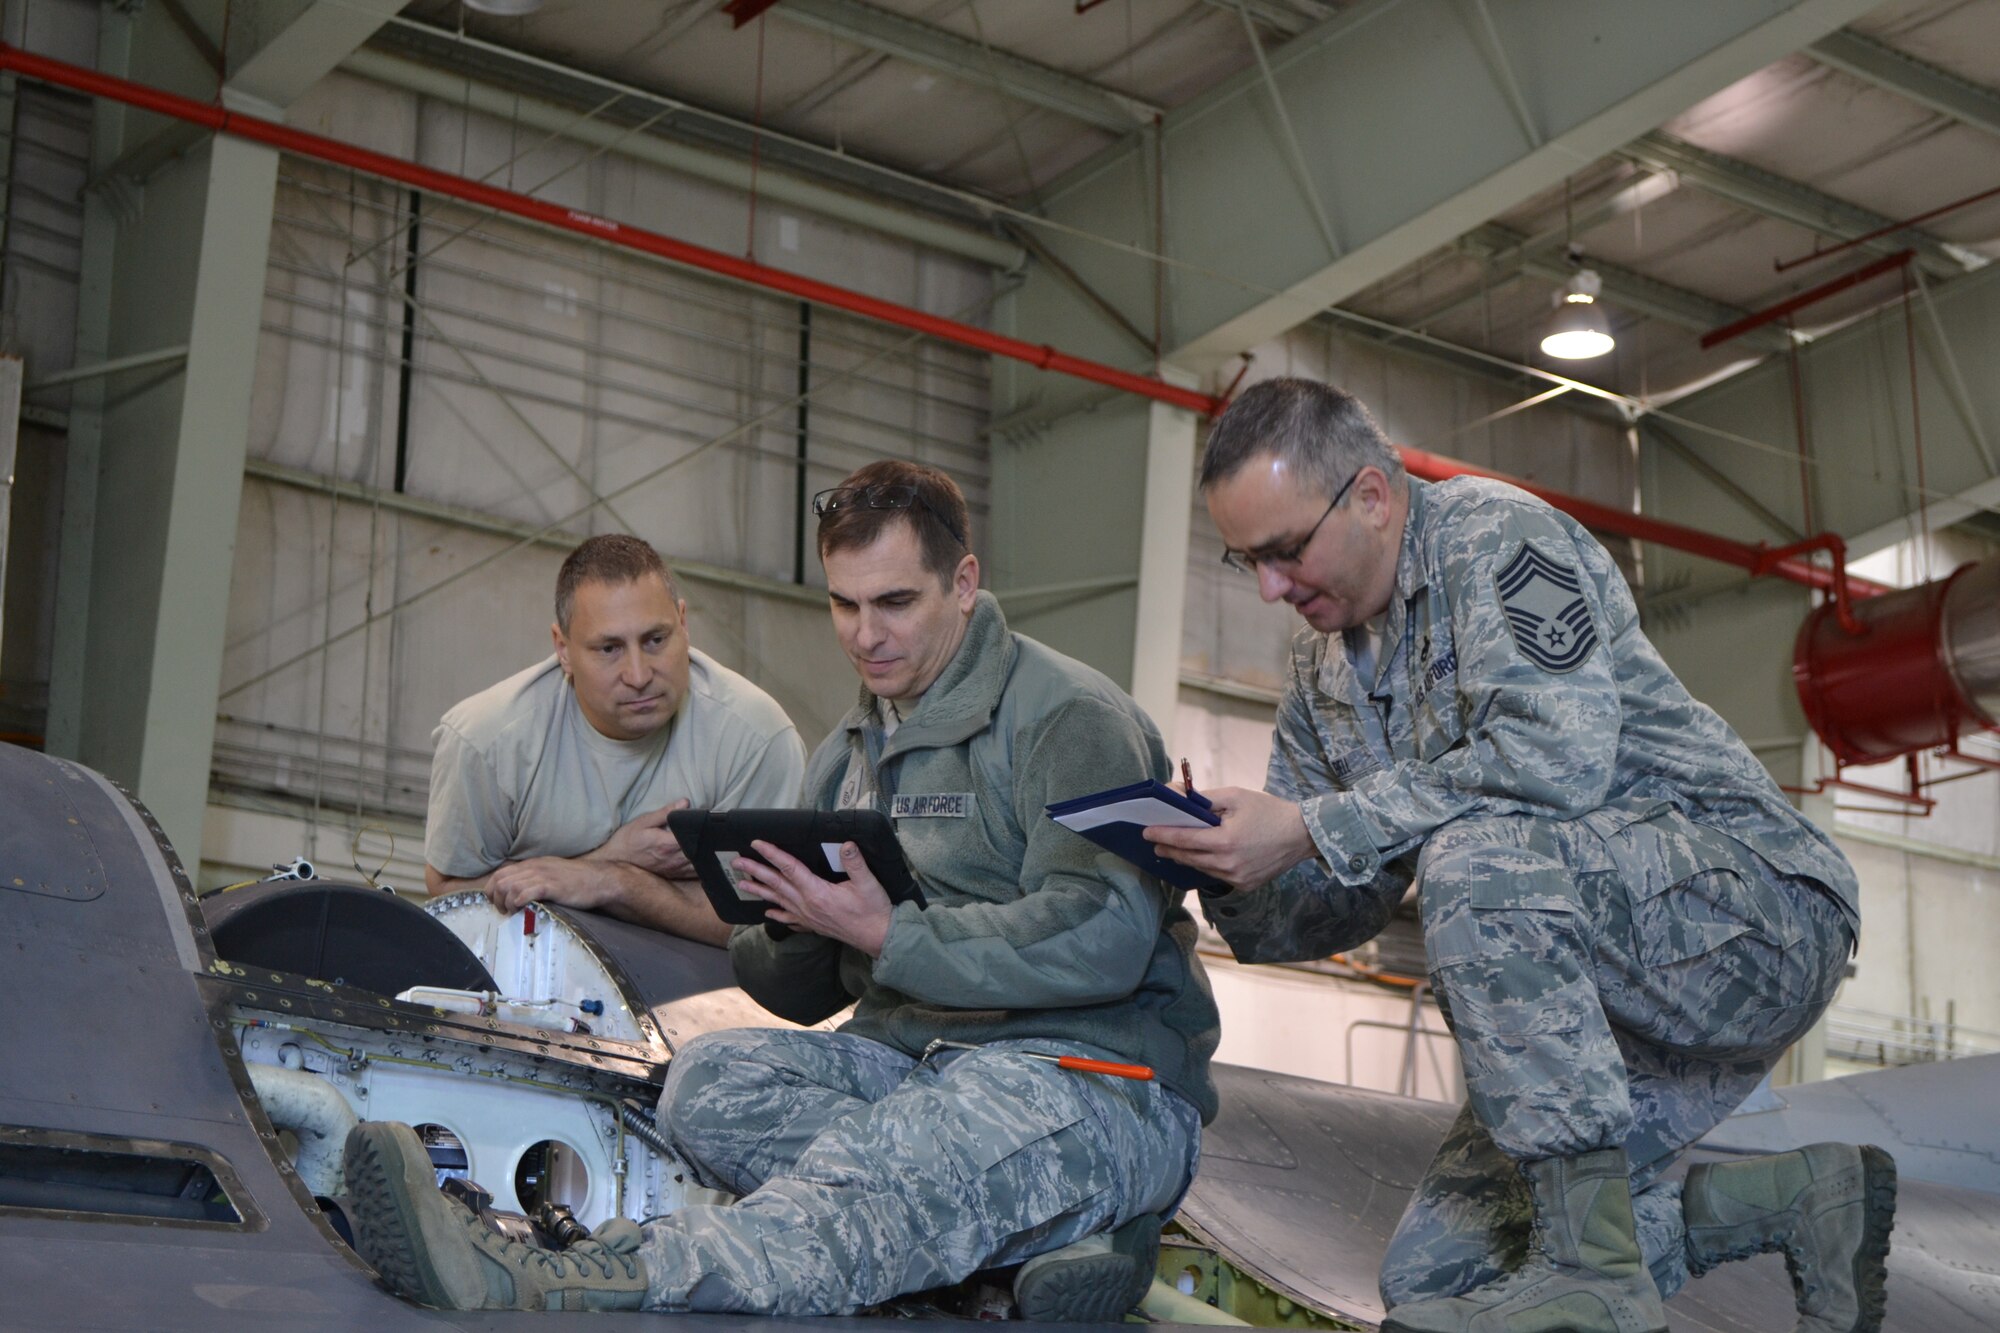 Tech. Sgt. Alan Columbo, 301st aircraft weapons systems technician (left), stands by his craftsmanship atop an F-16 while Master Sgt. Owen Cook (center), and Chief Master Sgt. Steve Bell, apply their Quality Assurance expertise during an inspection of the aircraft's 20mm cannon. (U.S. Air Force photo/TSgt Shawn McCowan)